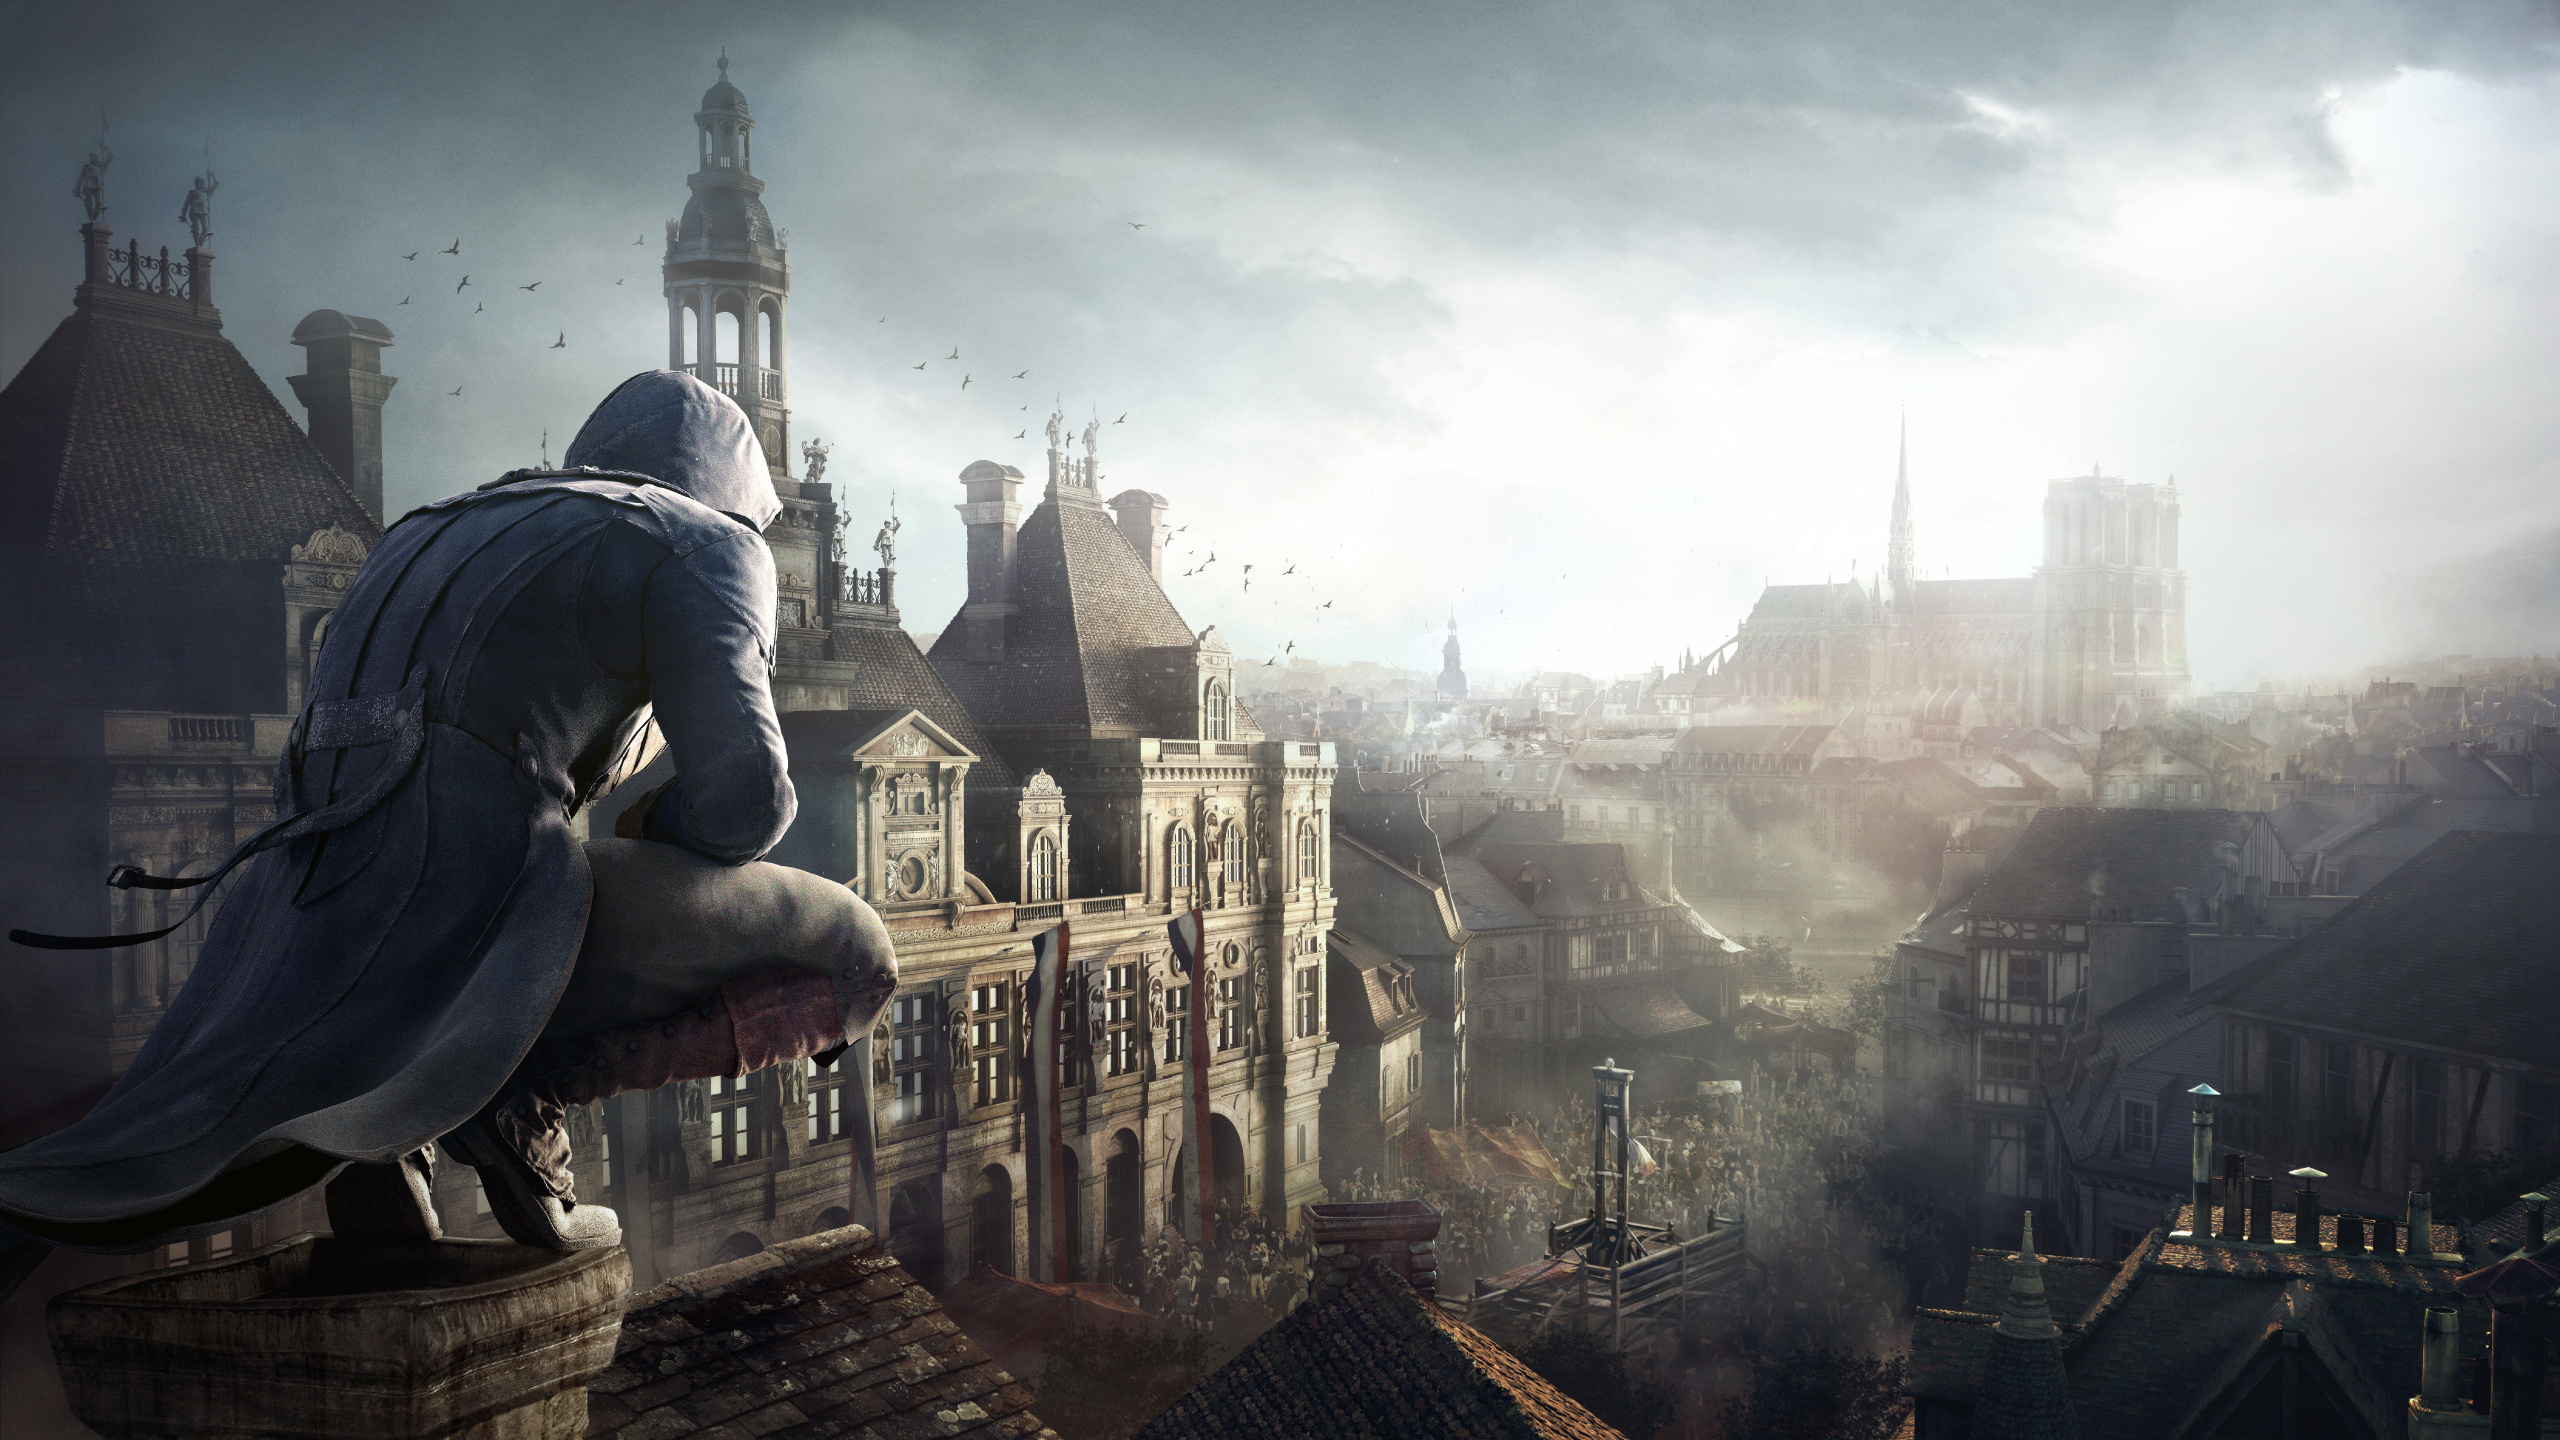 Assassins Creed Unity, Assassins Creed, Ubisoft, Arno Dorian, Obscurité. Wallpaper in 2560x1440 Resolution